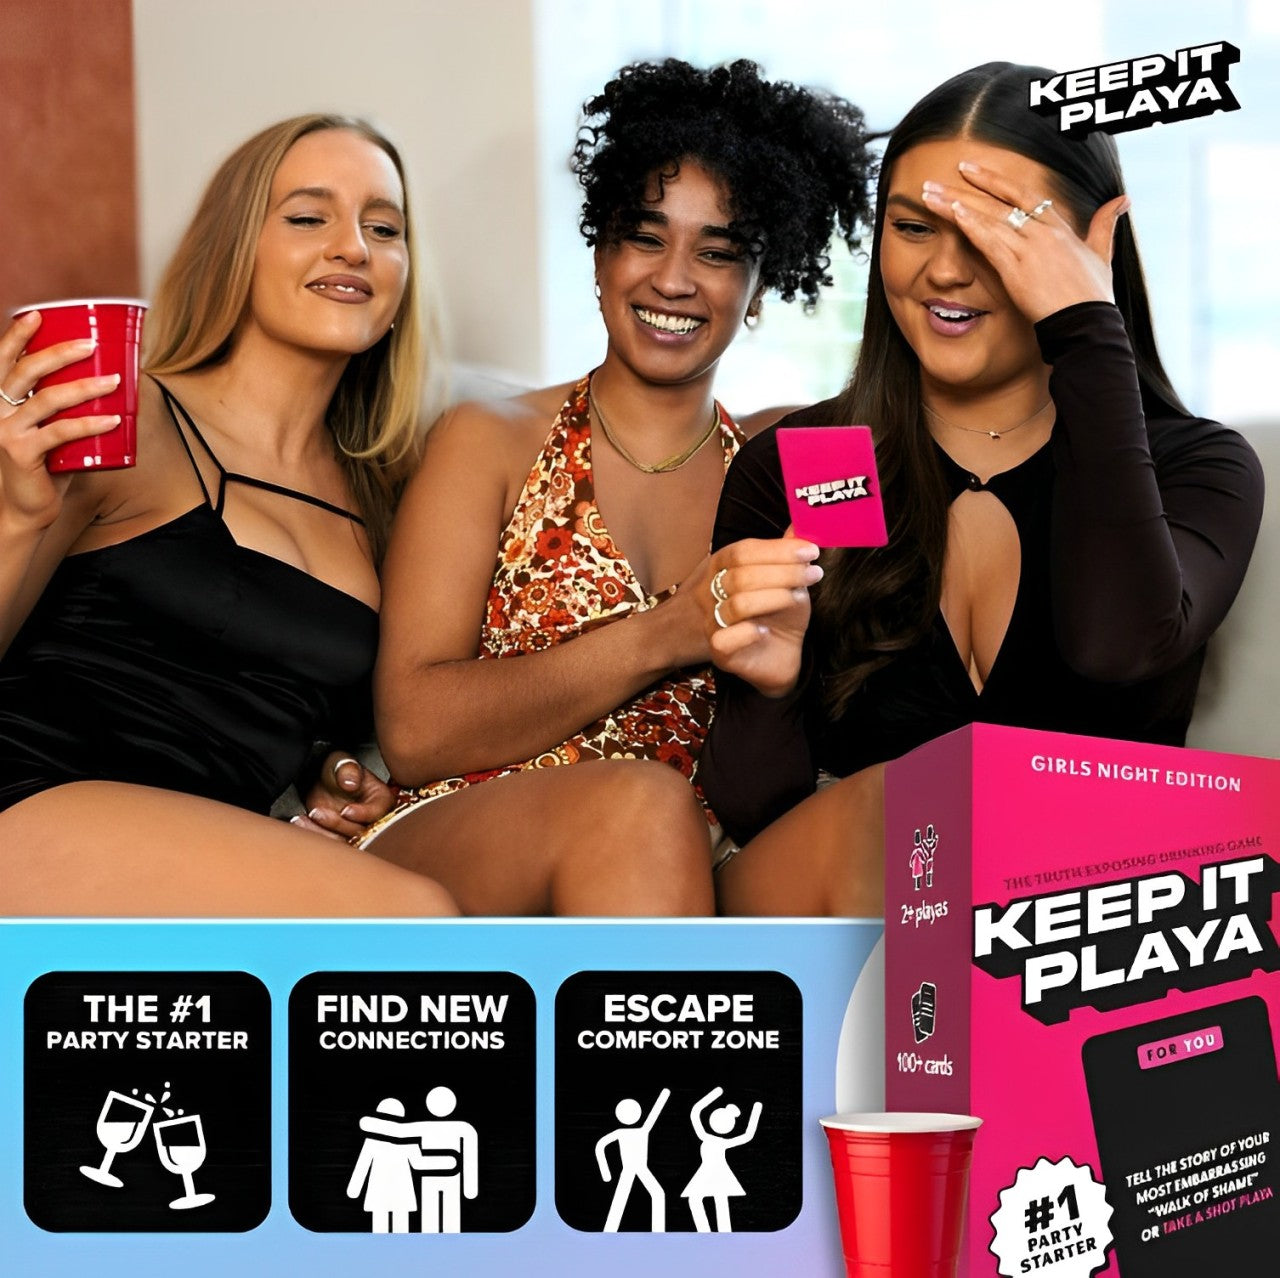 Shamrocks, Shenanigans, and Sips: Keep It Playa Drinking Card Game (Girls Night Edition) for St. Patrick’s Day Fun